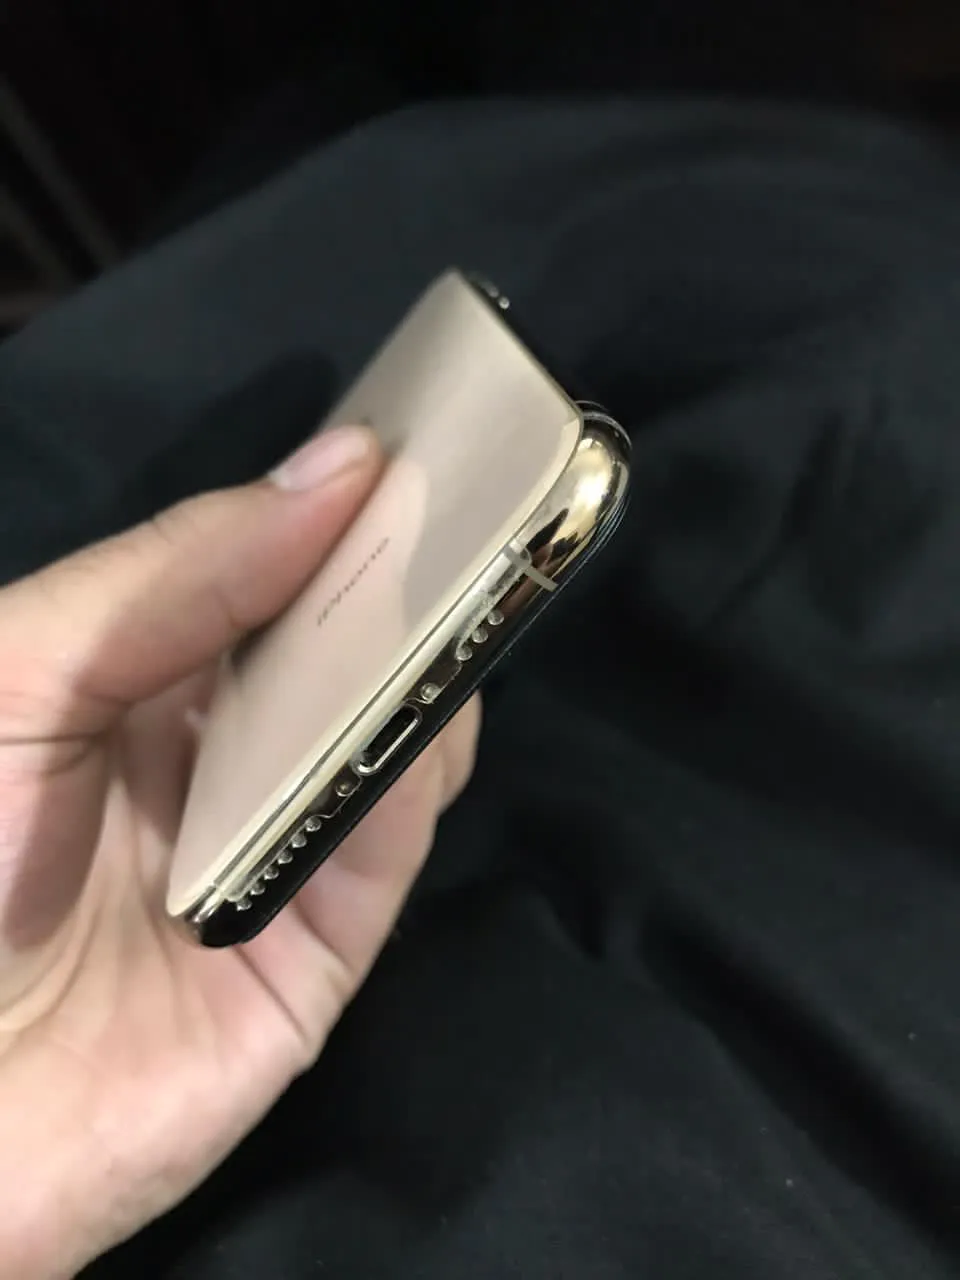 IPhone XS for sale - photo 1